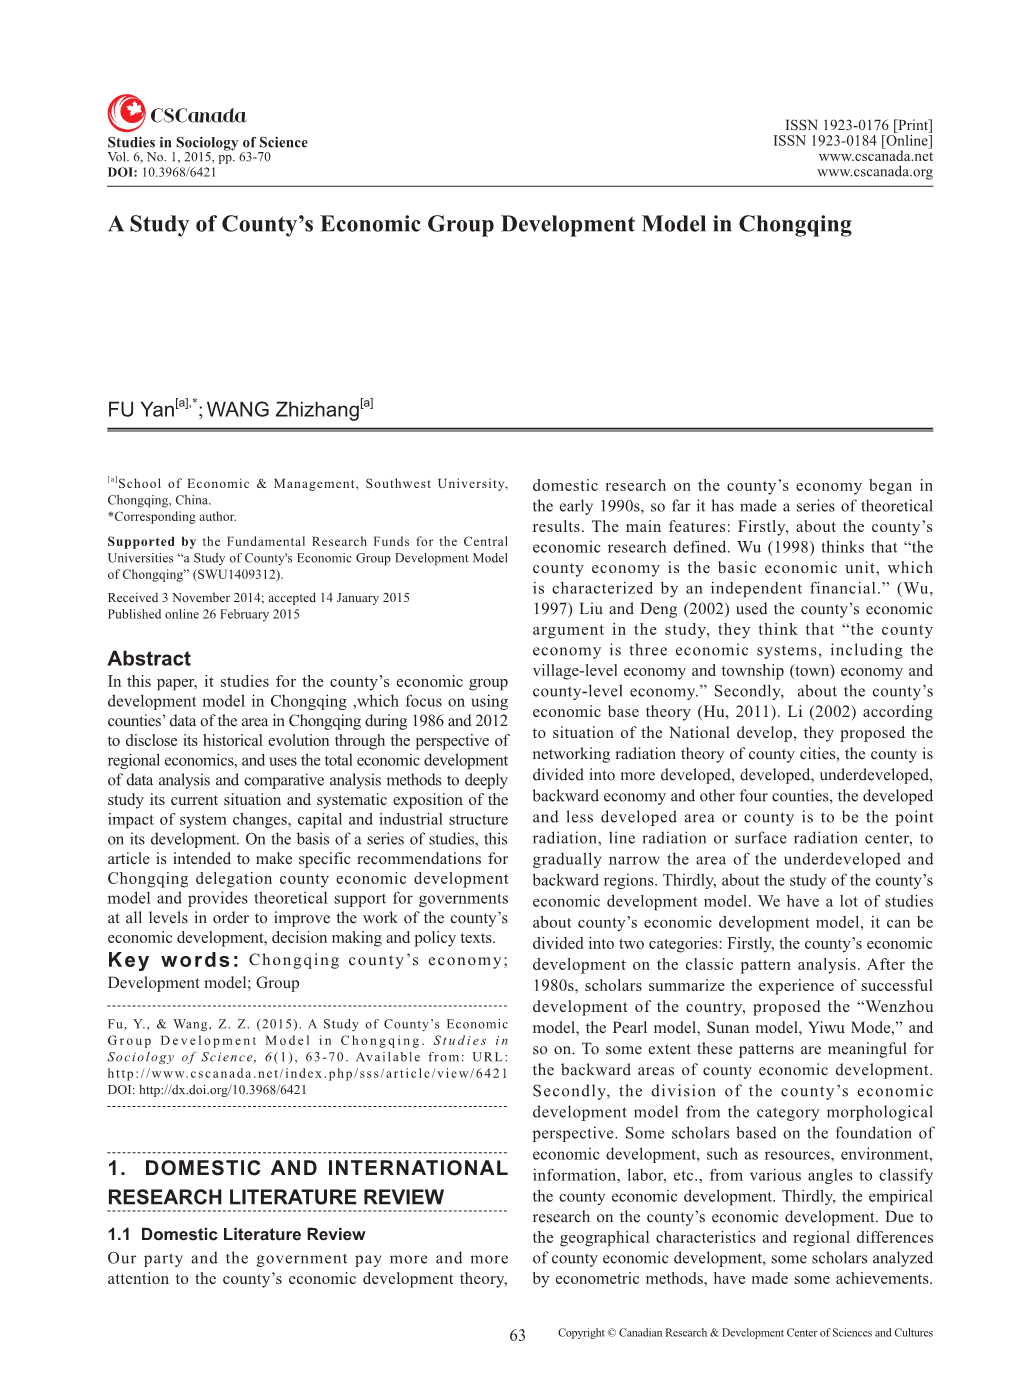 A Study of County's Economic Group Development Model in Chongqing